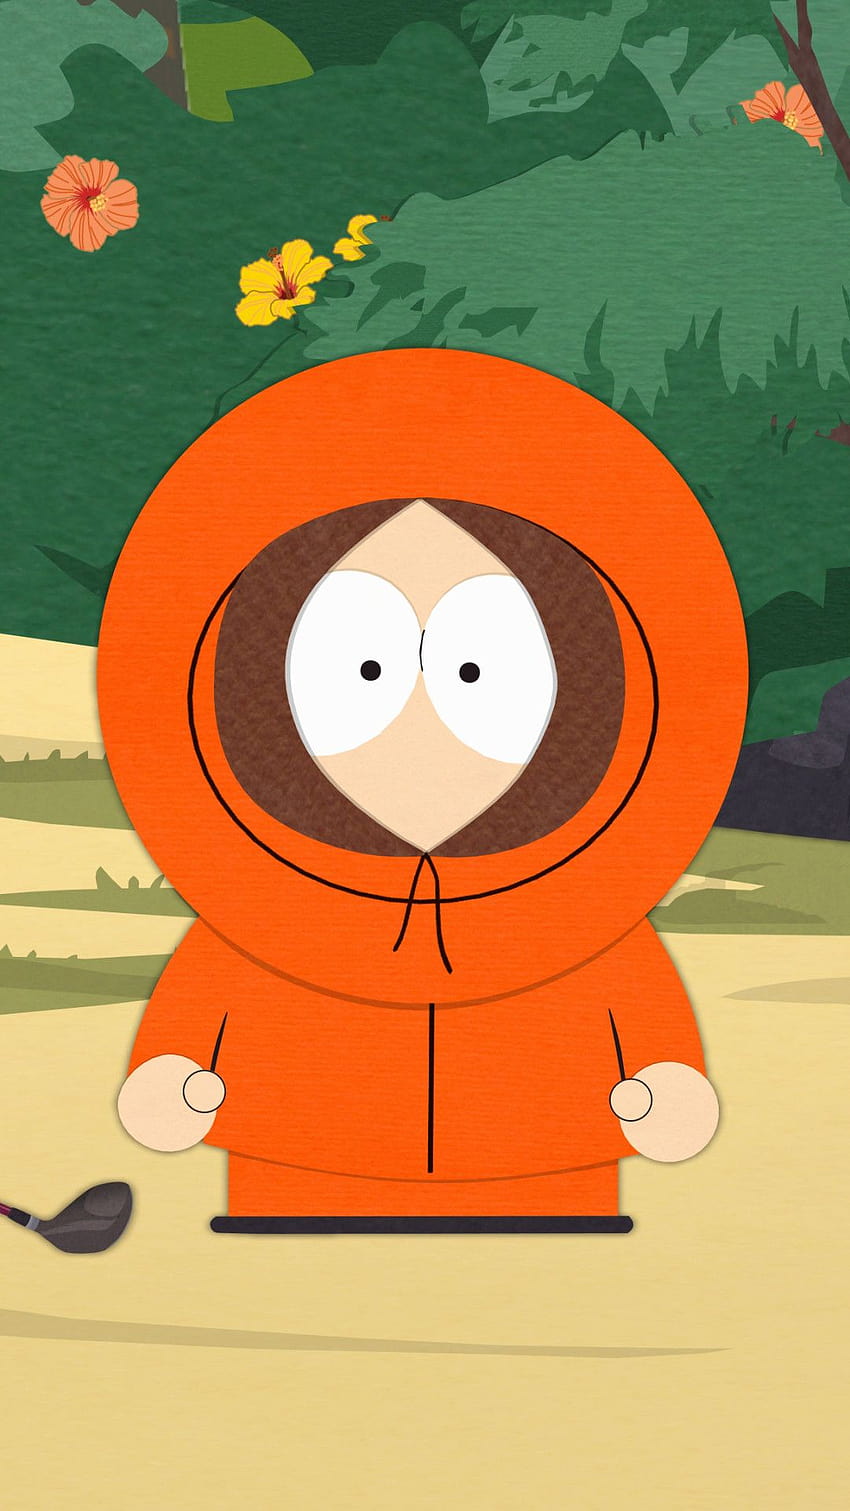 Tv Show South Park Butters Stotch Kenny Mccormick HD phone wallpaper